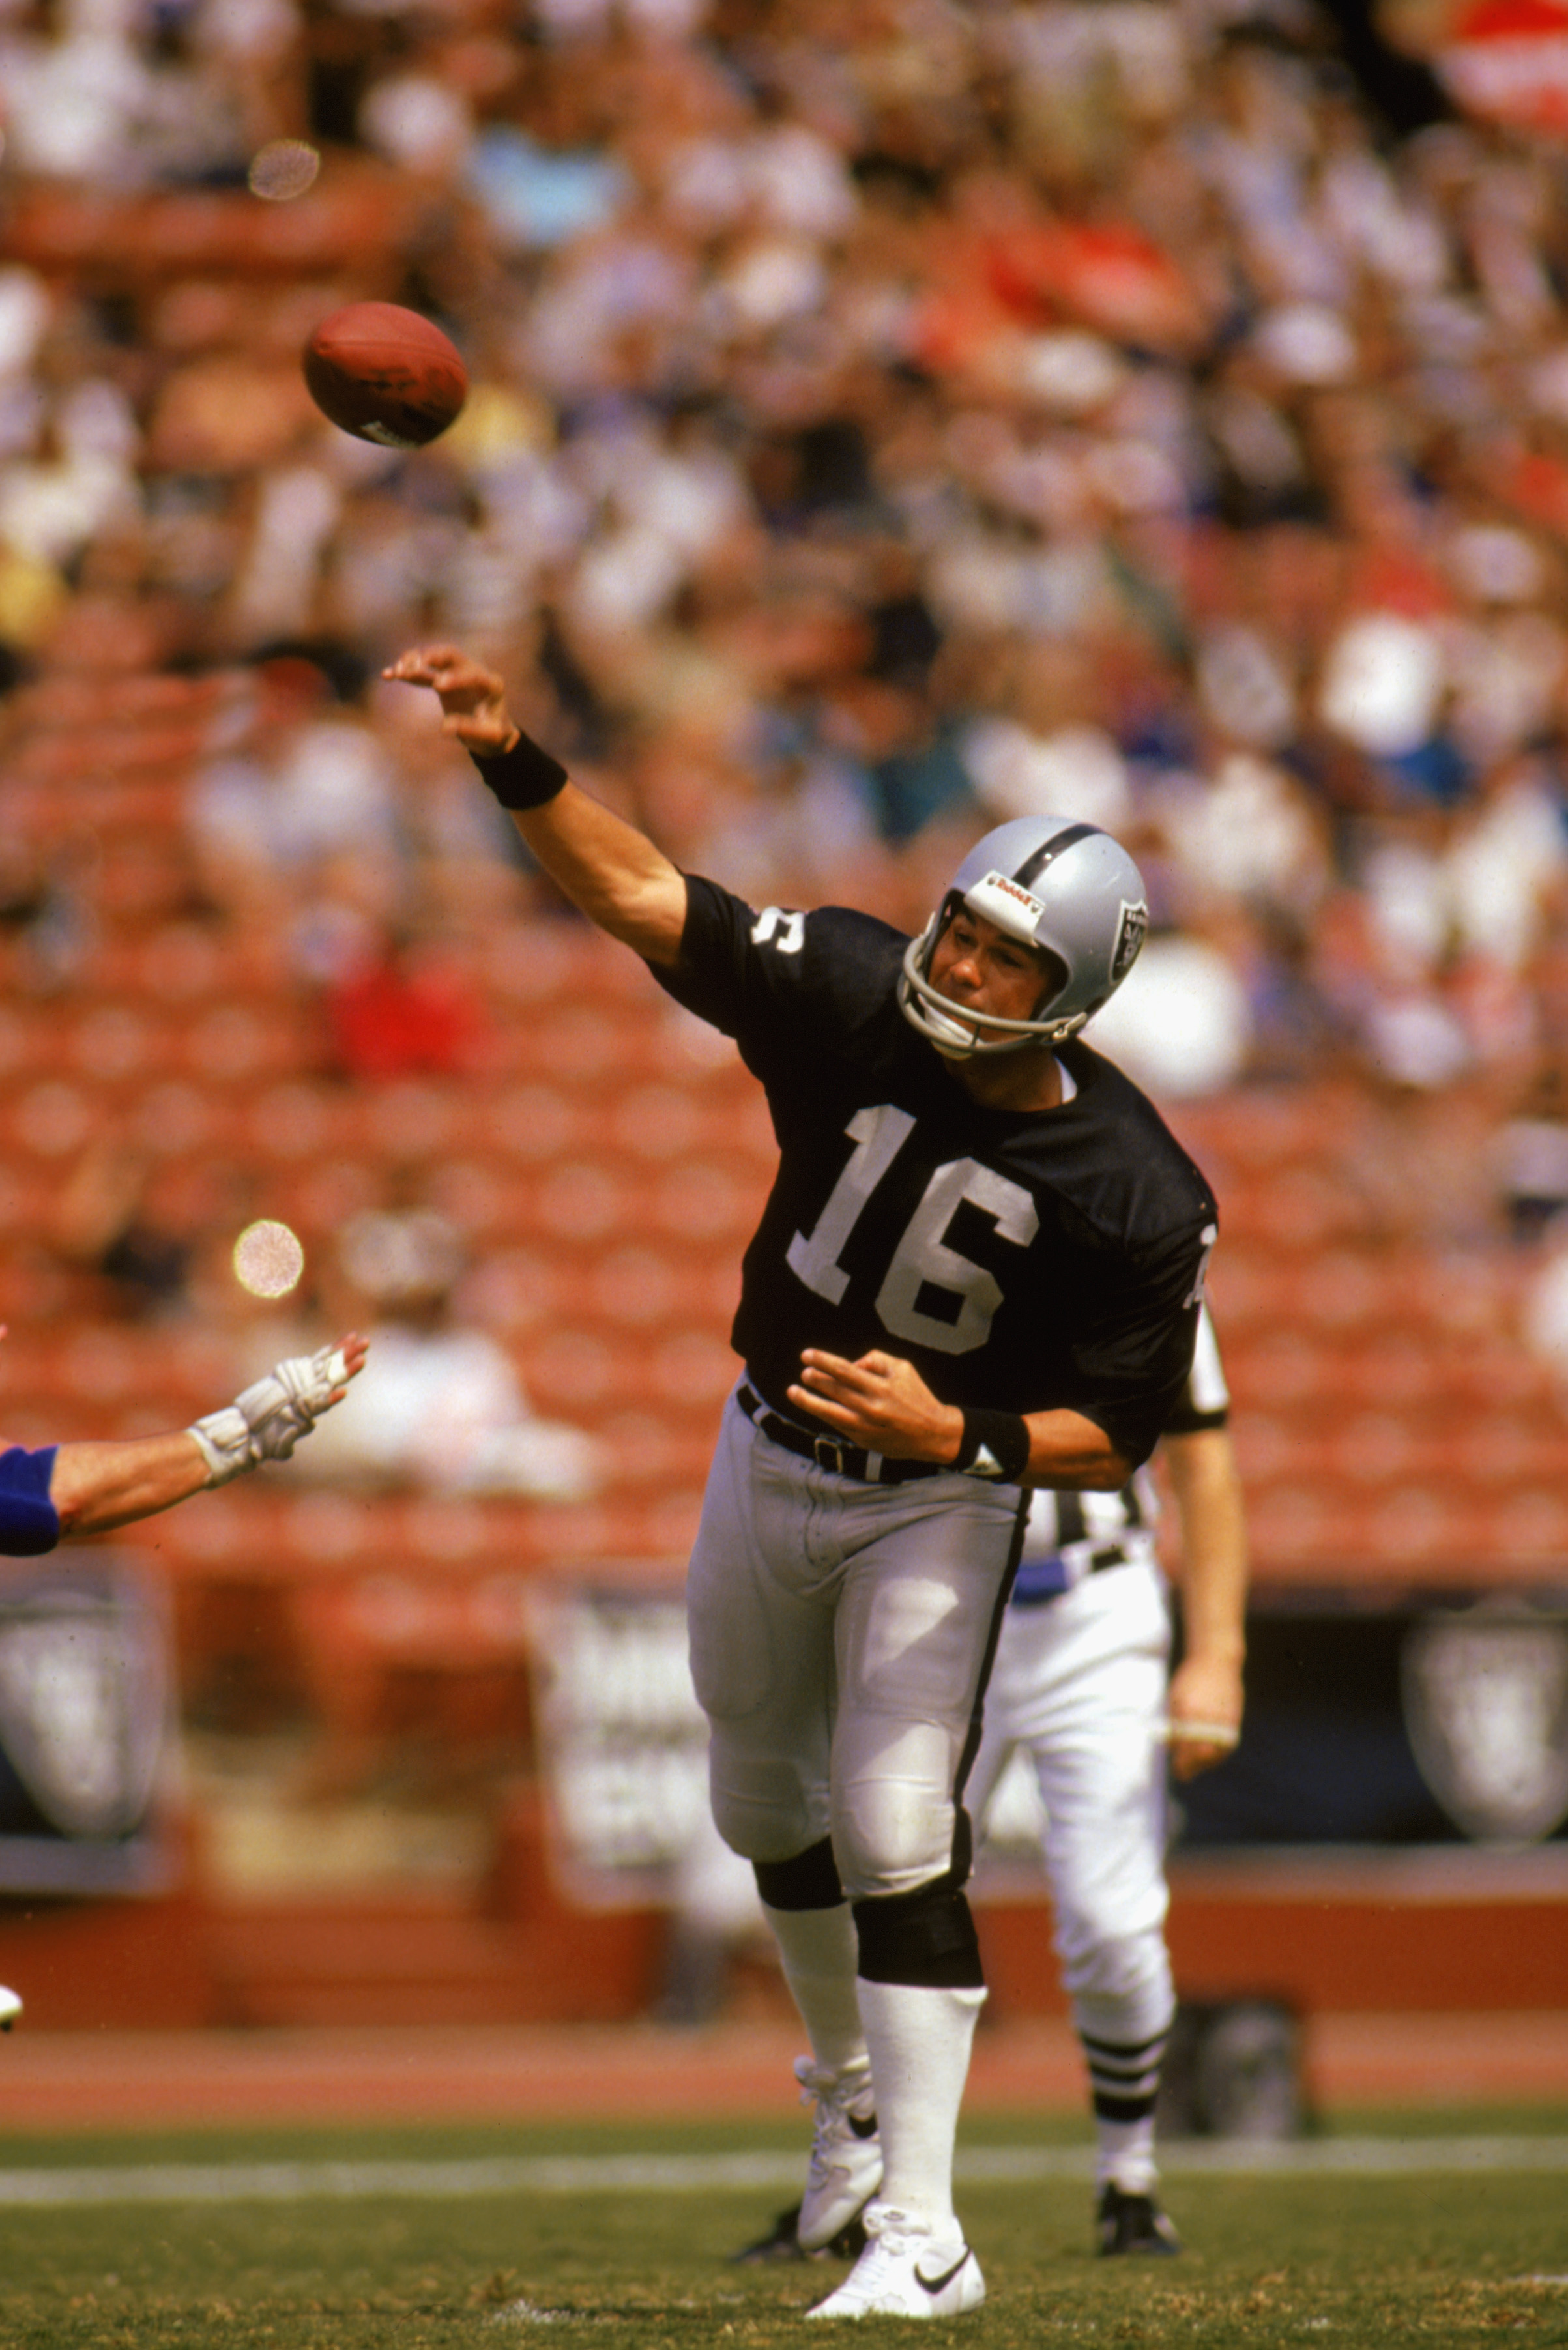 LOS ANGELES - 1985:  Jim Plunkett #16 of the Los Angeles Raiders passes the ball against the New York Giants at the Los Angeles Coliseum in Los Angeles, California. The Giants defeated the Raiders 14-9. (Photo by Mike Powell/Getty Images)